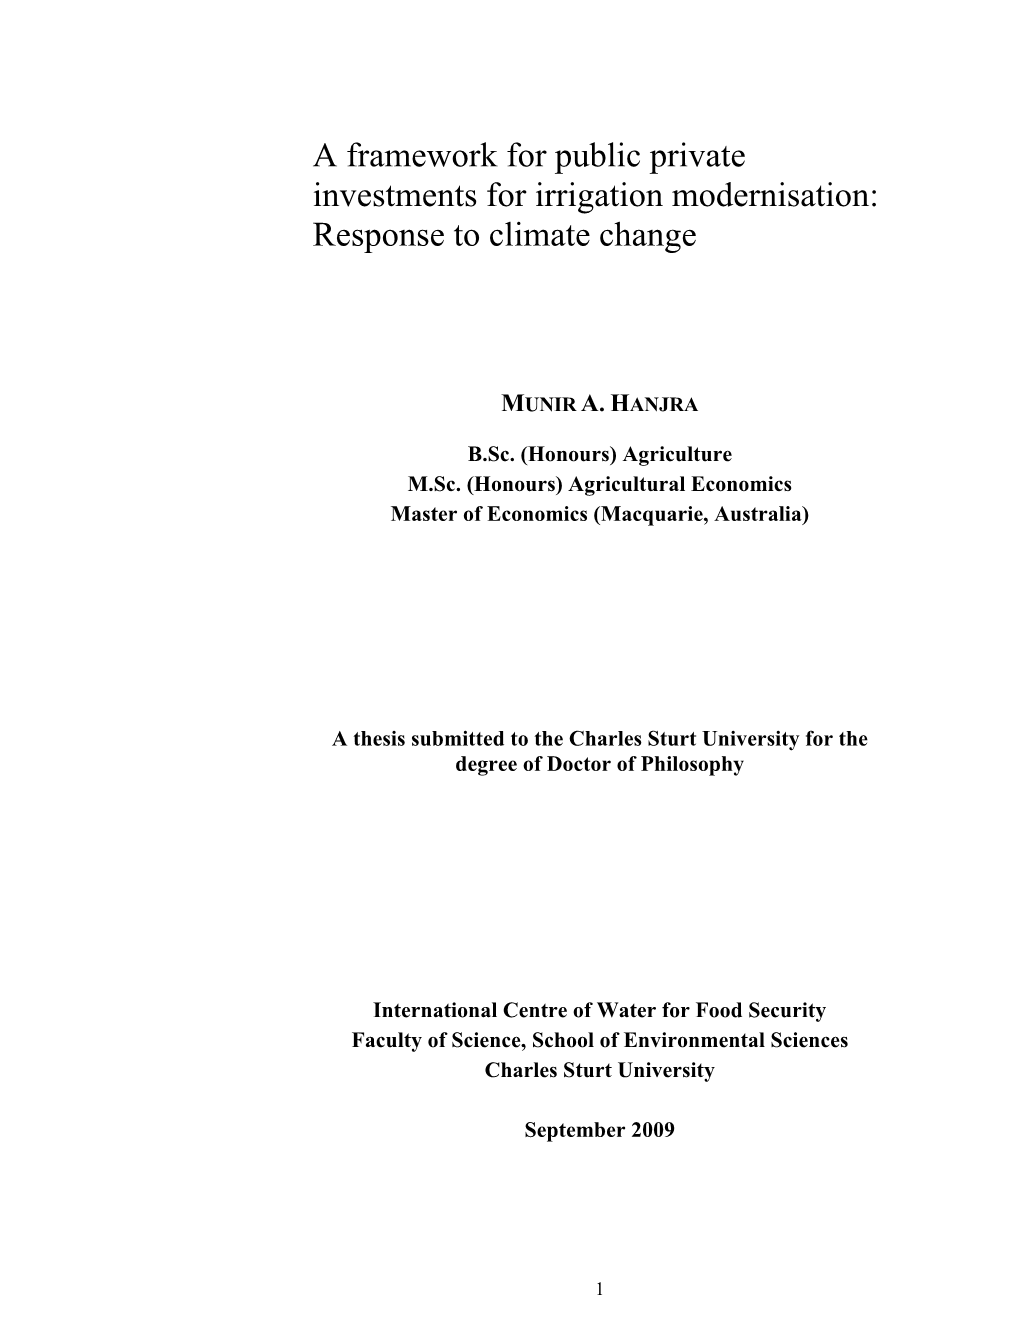 A Framework for Public Private Investments for Irrigation Modernisation: Response to Climate Change